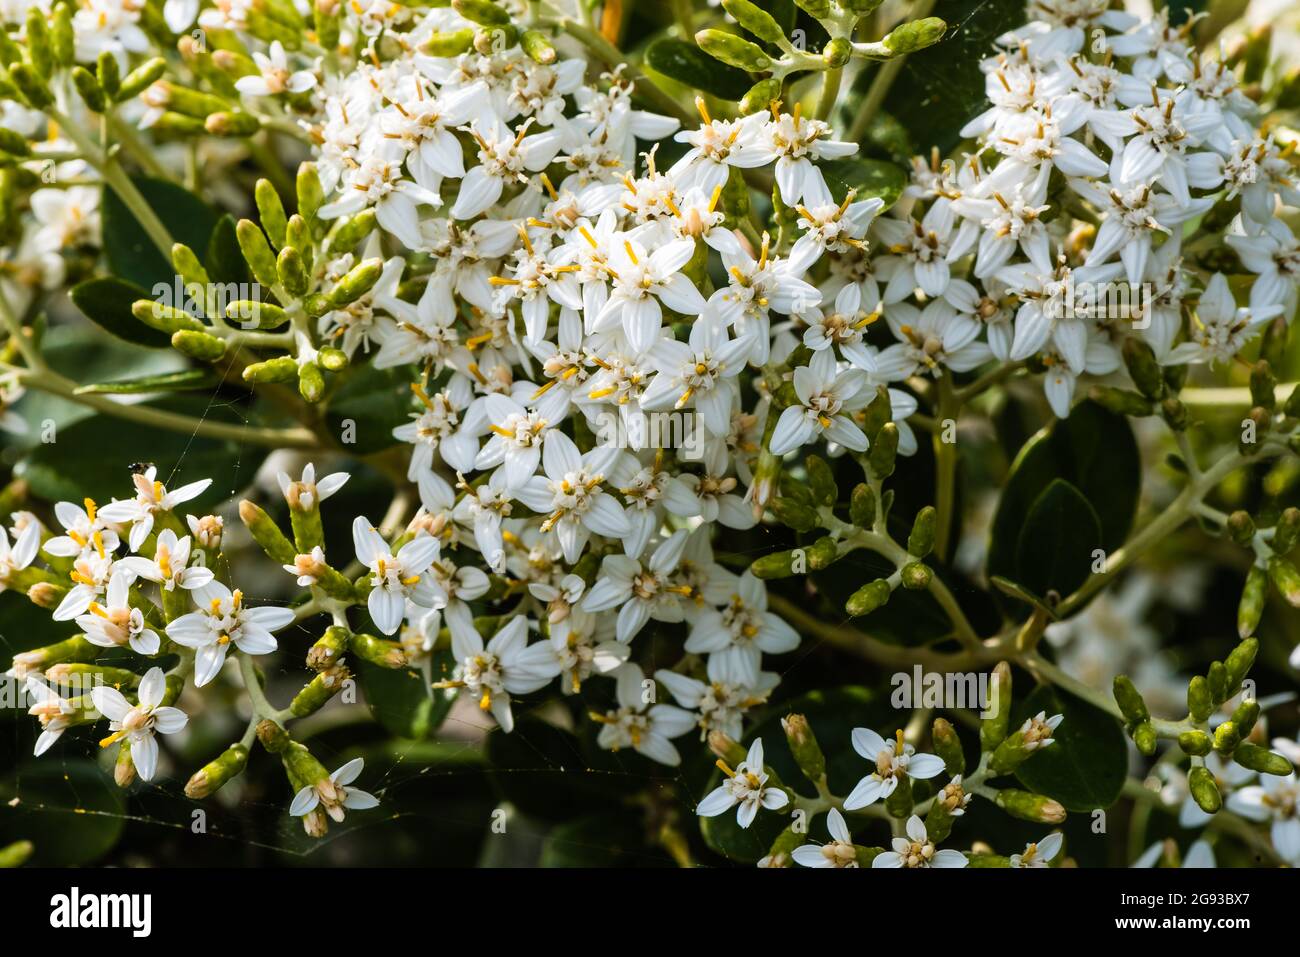 Olearia Haastii  growing in a Counry Garden. Stock Photo